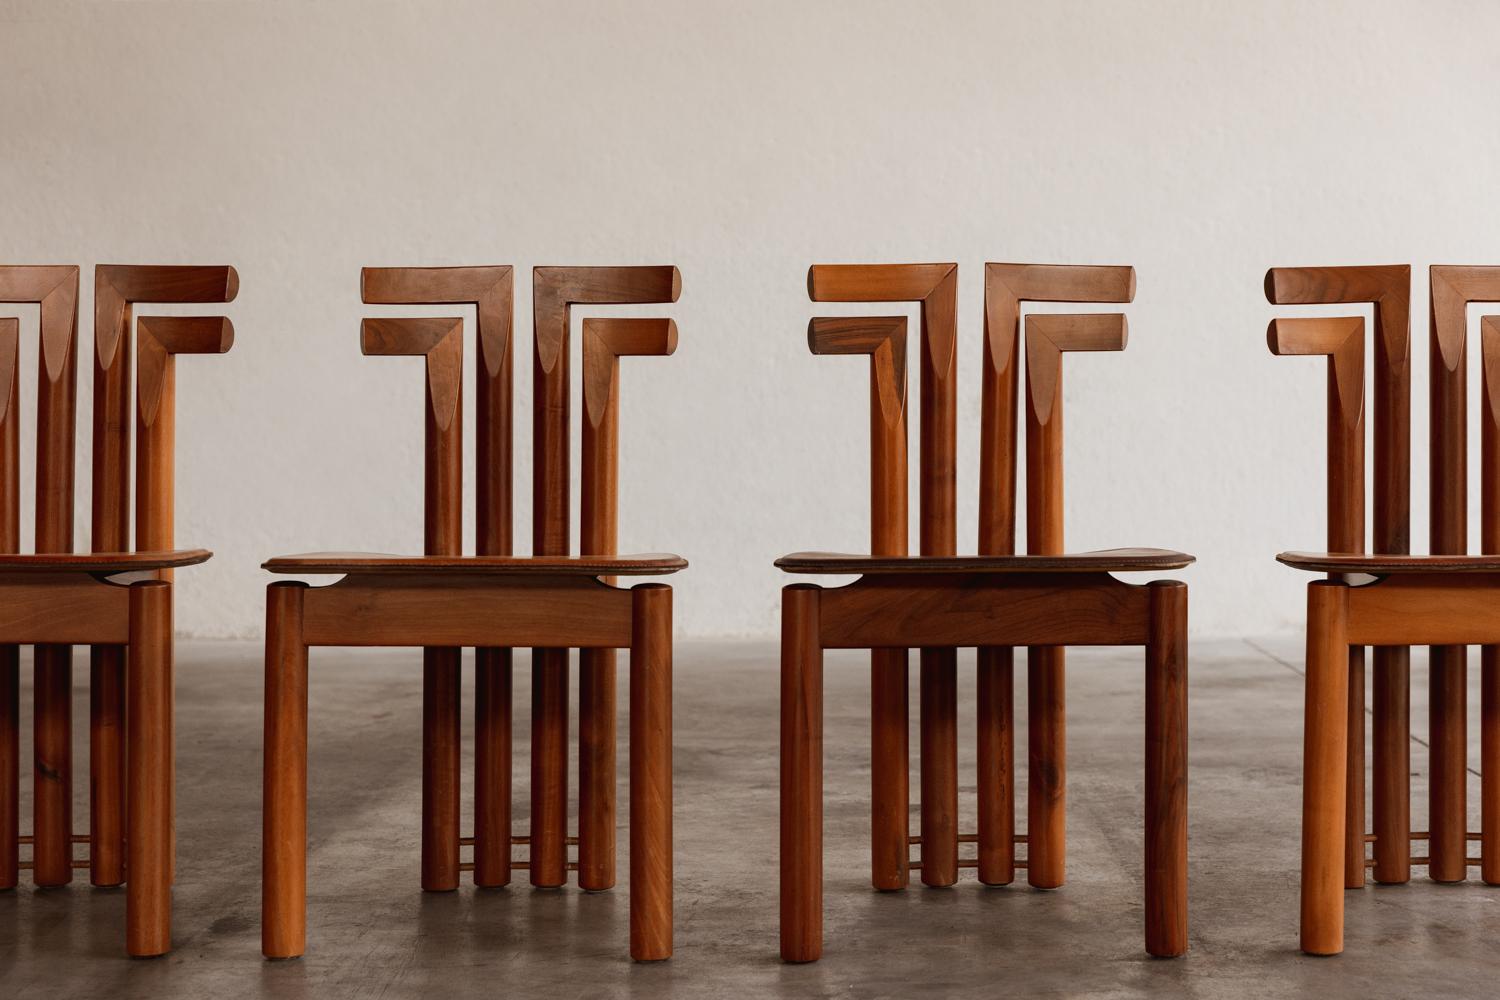 Late 20th Century Mario Marenco “Sapporo” Dining Chairs for Mobil Girgi, 1970, set of 4 For Sale